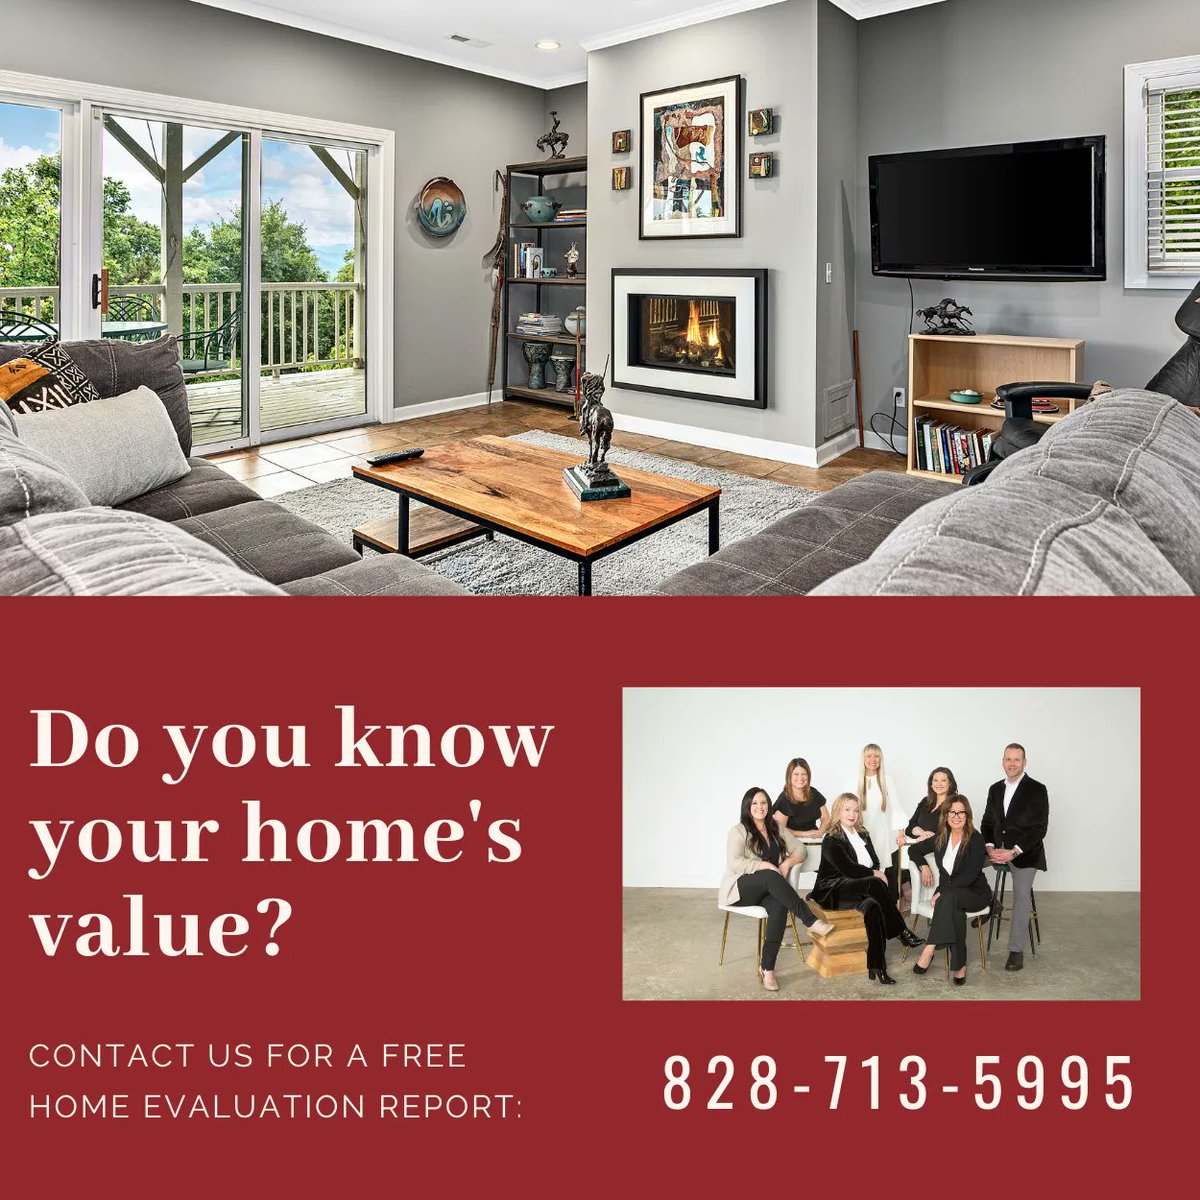 Do you know your home's value? Call the Marie Reed Team to find out and how to get top dollar for your home!

📲 828-553-7893 

#MARIEREEDTEAM
#AVL #WNC